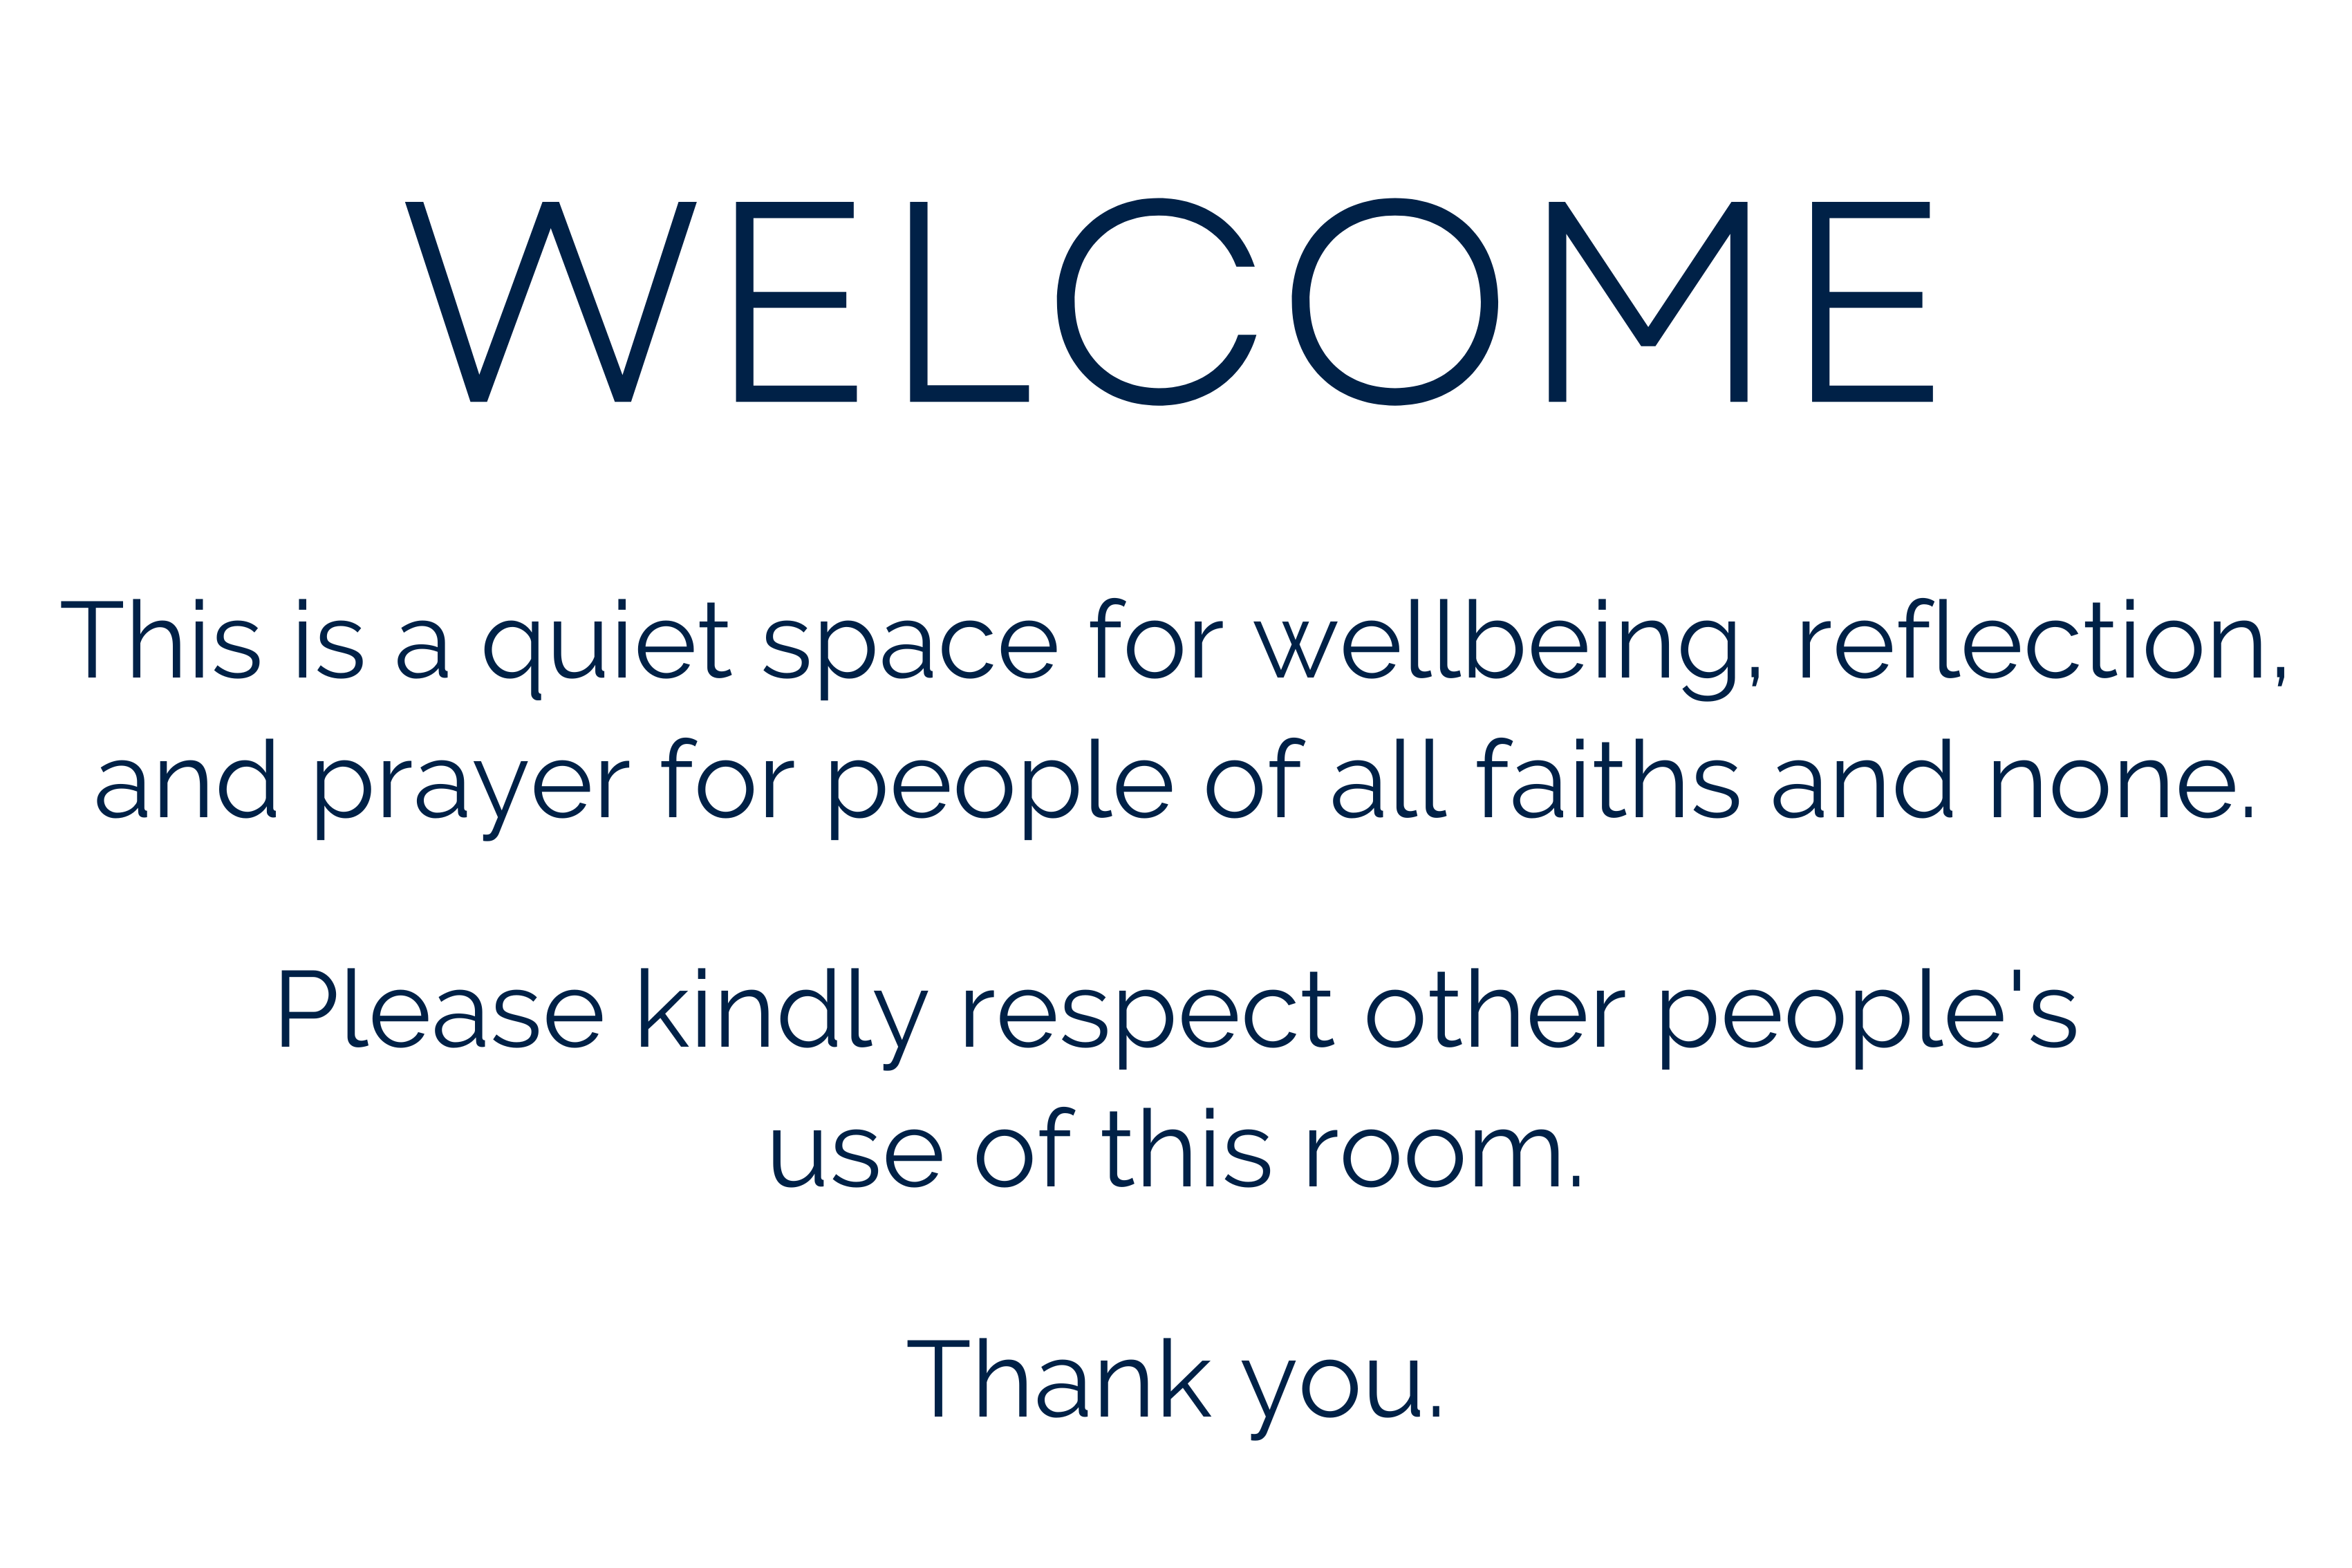 WELCOME: This is a quiet space for wellbeing, reflection, and prayer for people of all faiths and none. Please kindly respect other people's use of this room. Thank you.